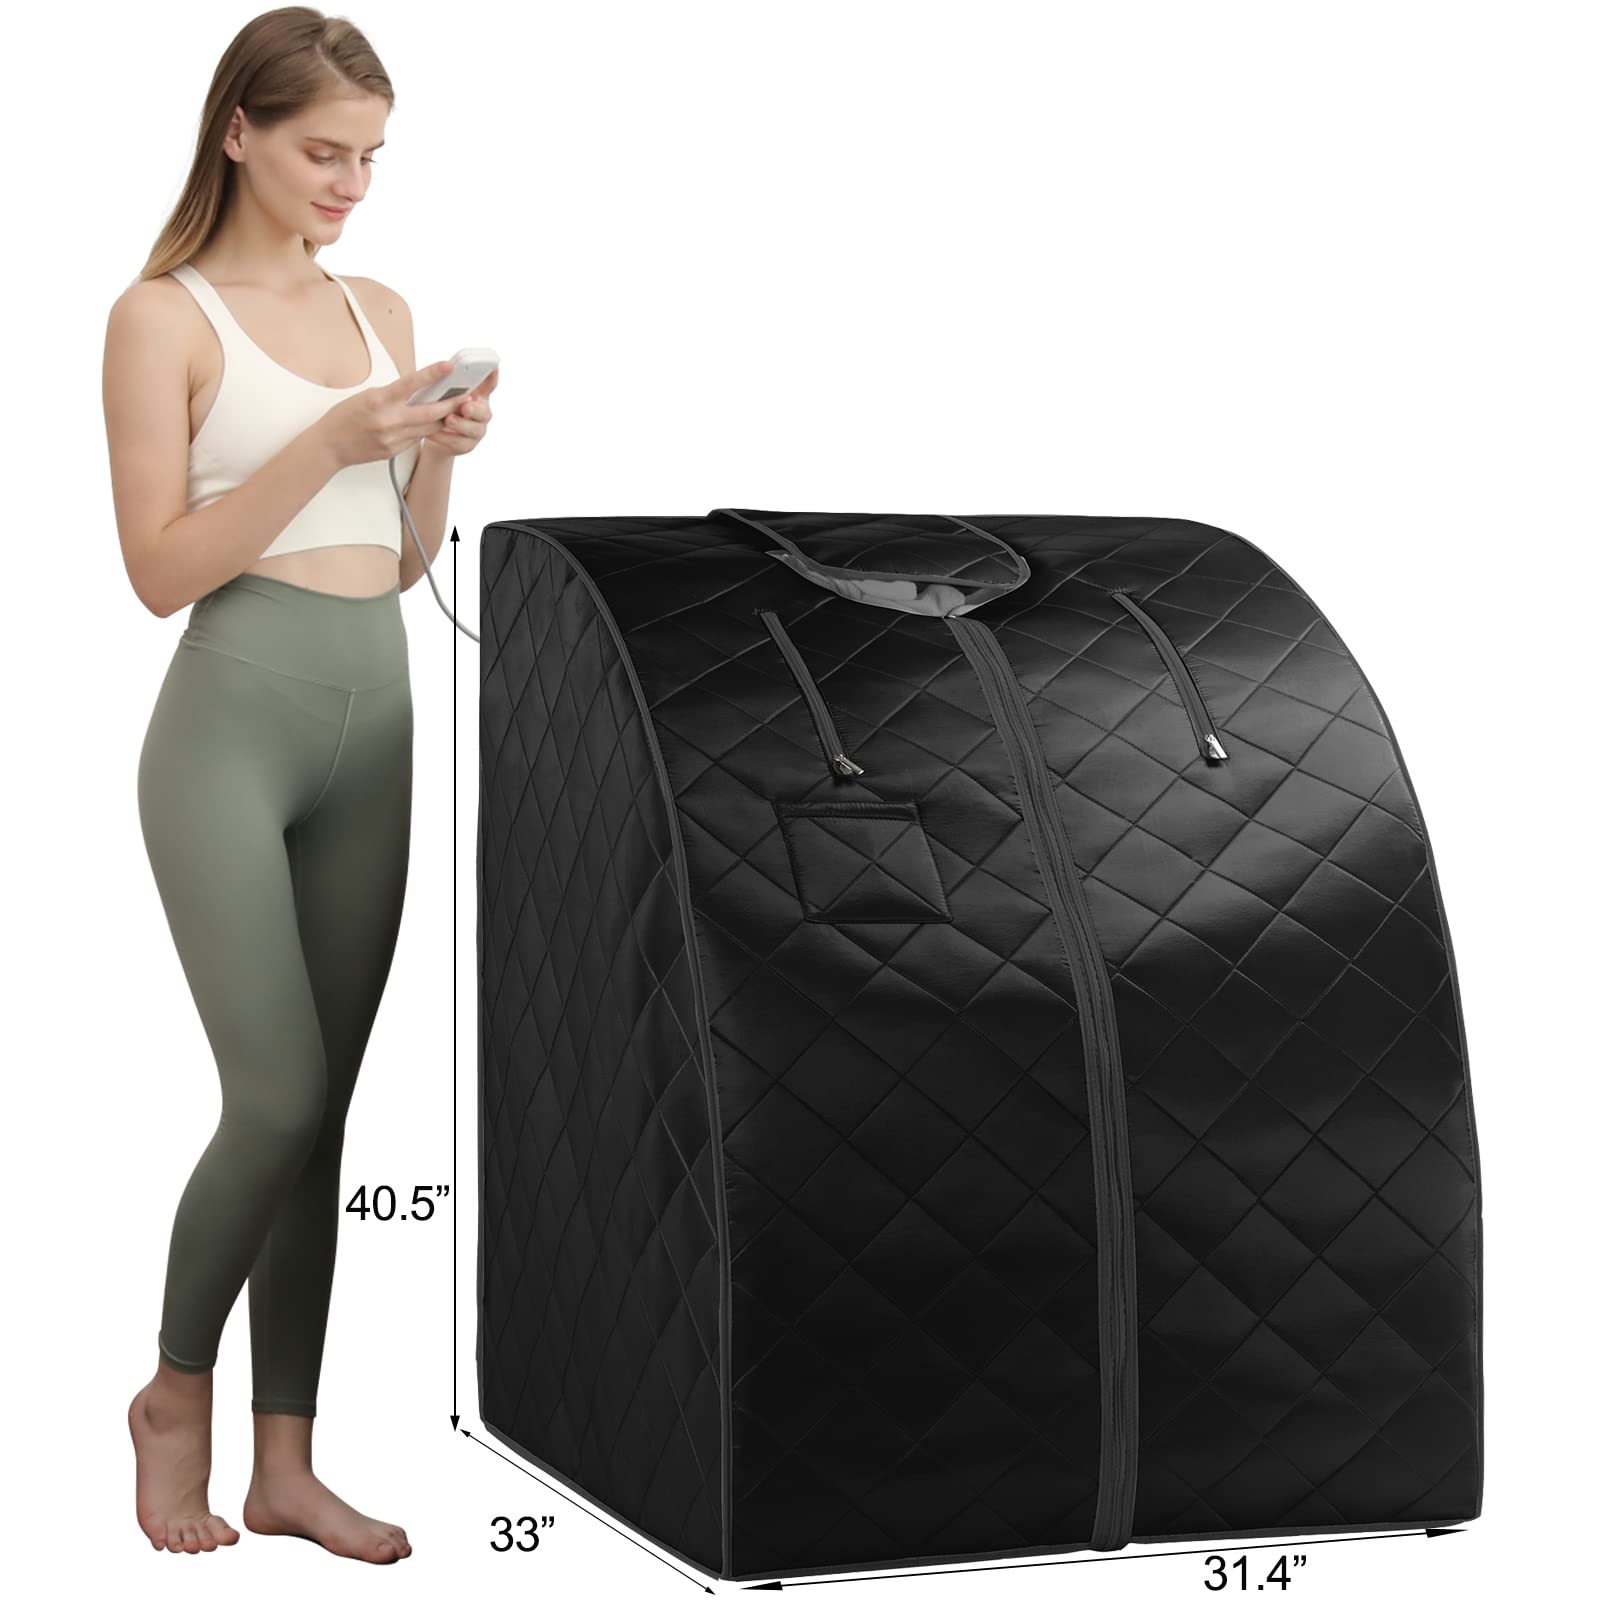 ZONEMEL Personal Far Infrared Sauna for Home, Oversized Portable Sauna for Relaxation, Better Sleep, with Heating Foot Pad, Portable Chair (X-Large, Black, L 33” x W 31.5” x H 40.5”)